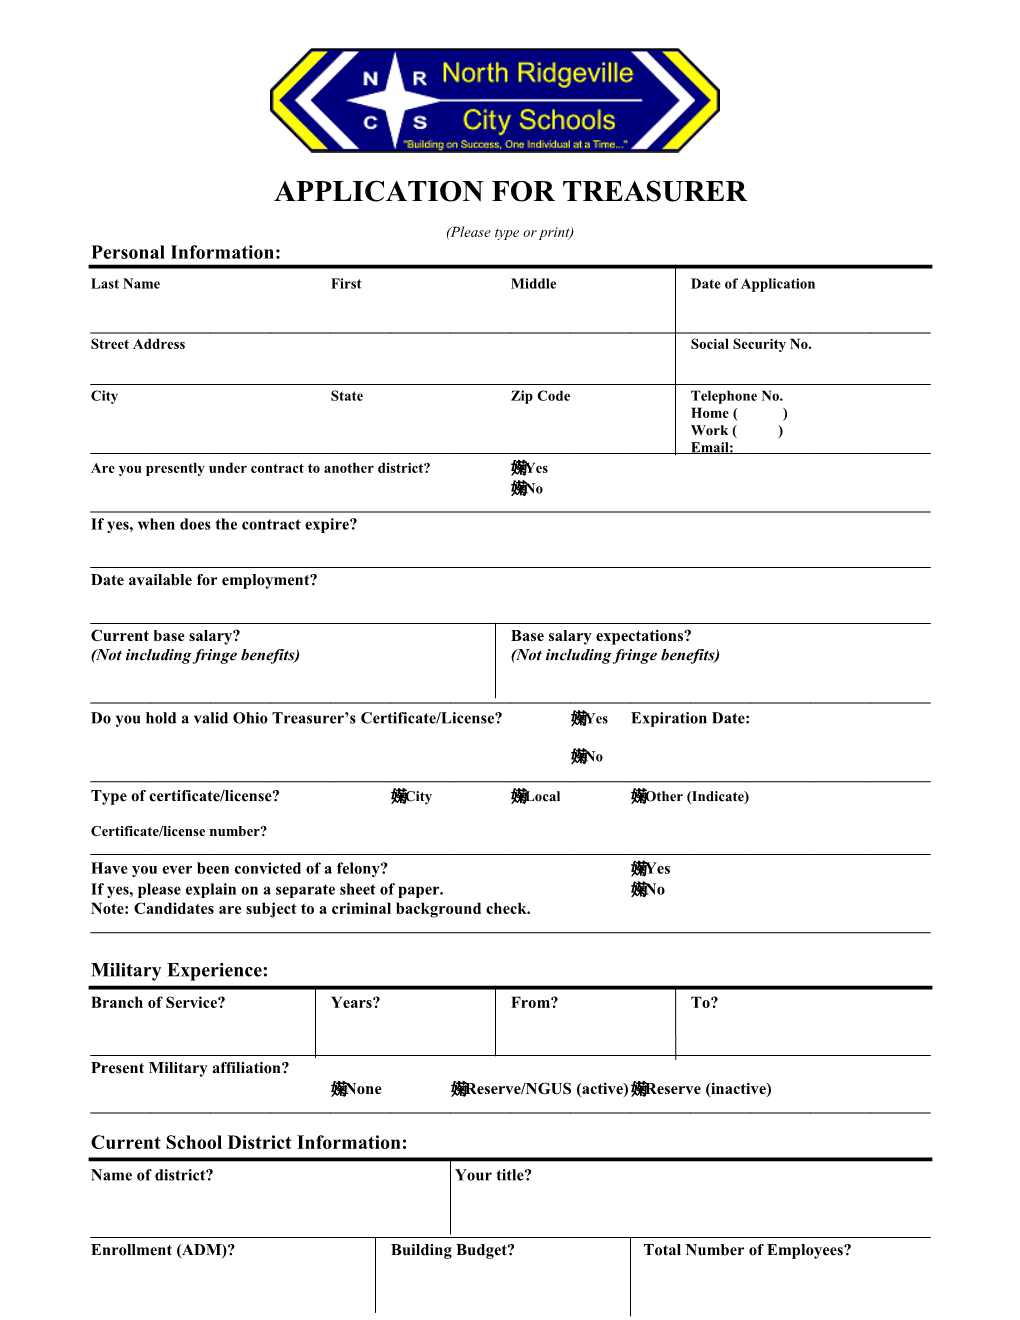 Application for Superintendent